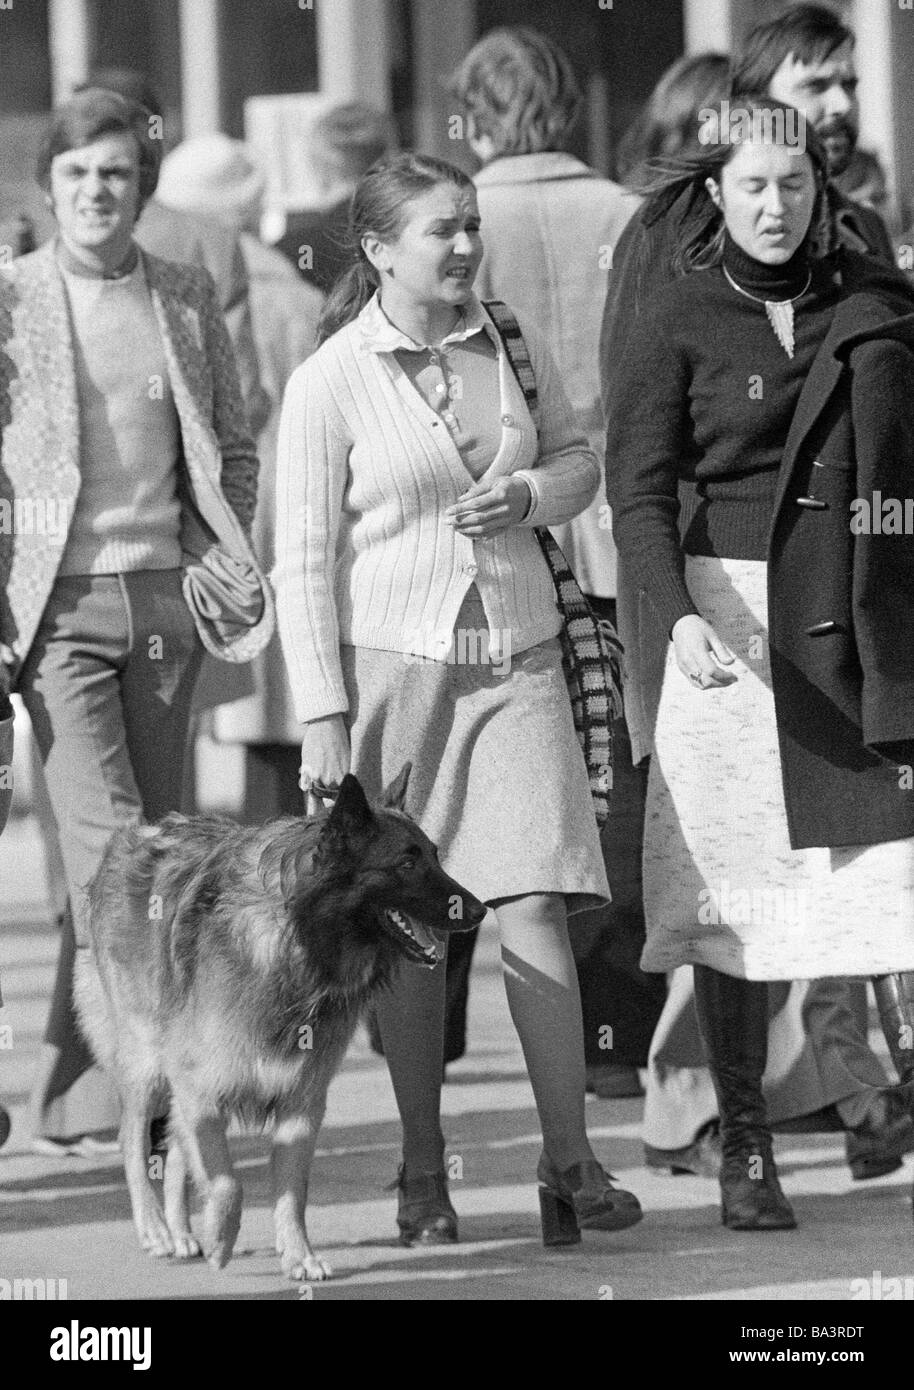 Seventies, black and white photo, people, two women with a sheepdog in the pedestrian zone, everyday life, waistcoat, skirt, aged 30 to 40 years, France, Paris Stock Photo